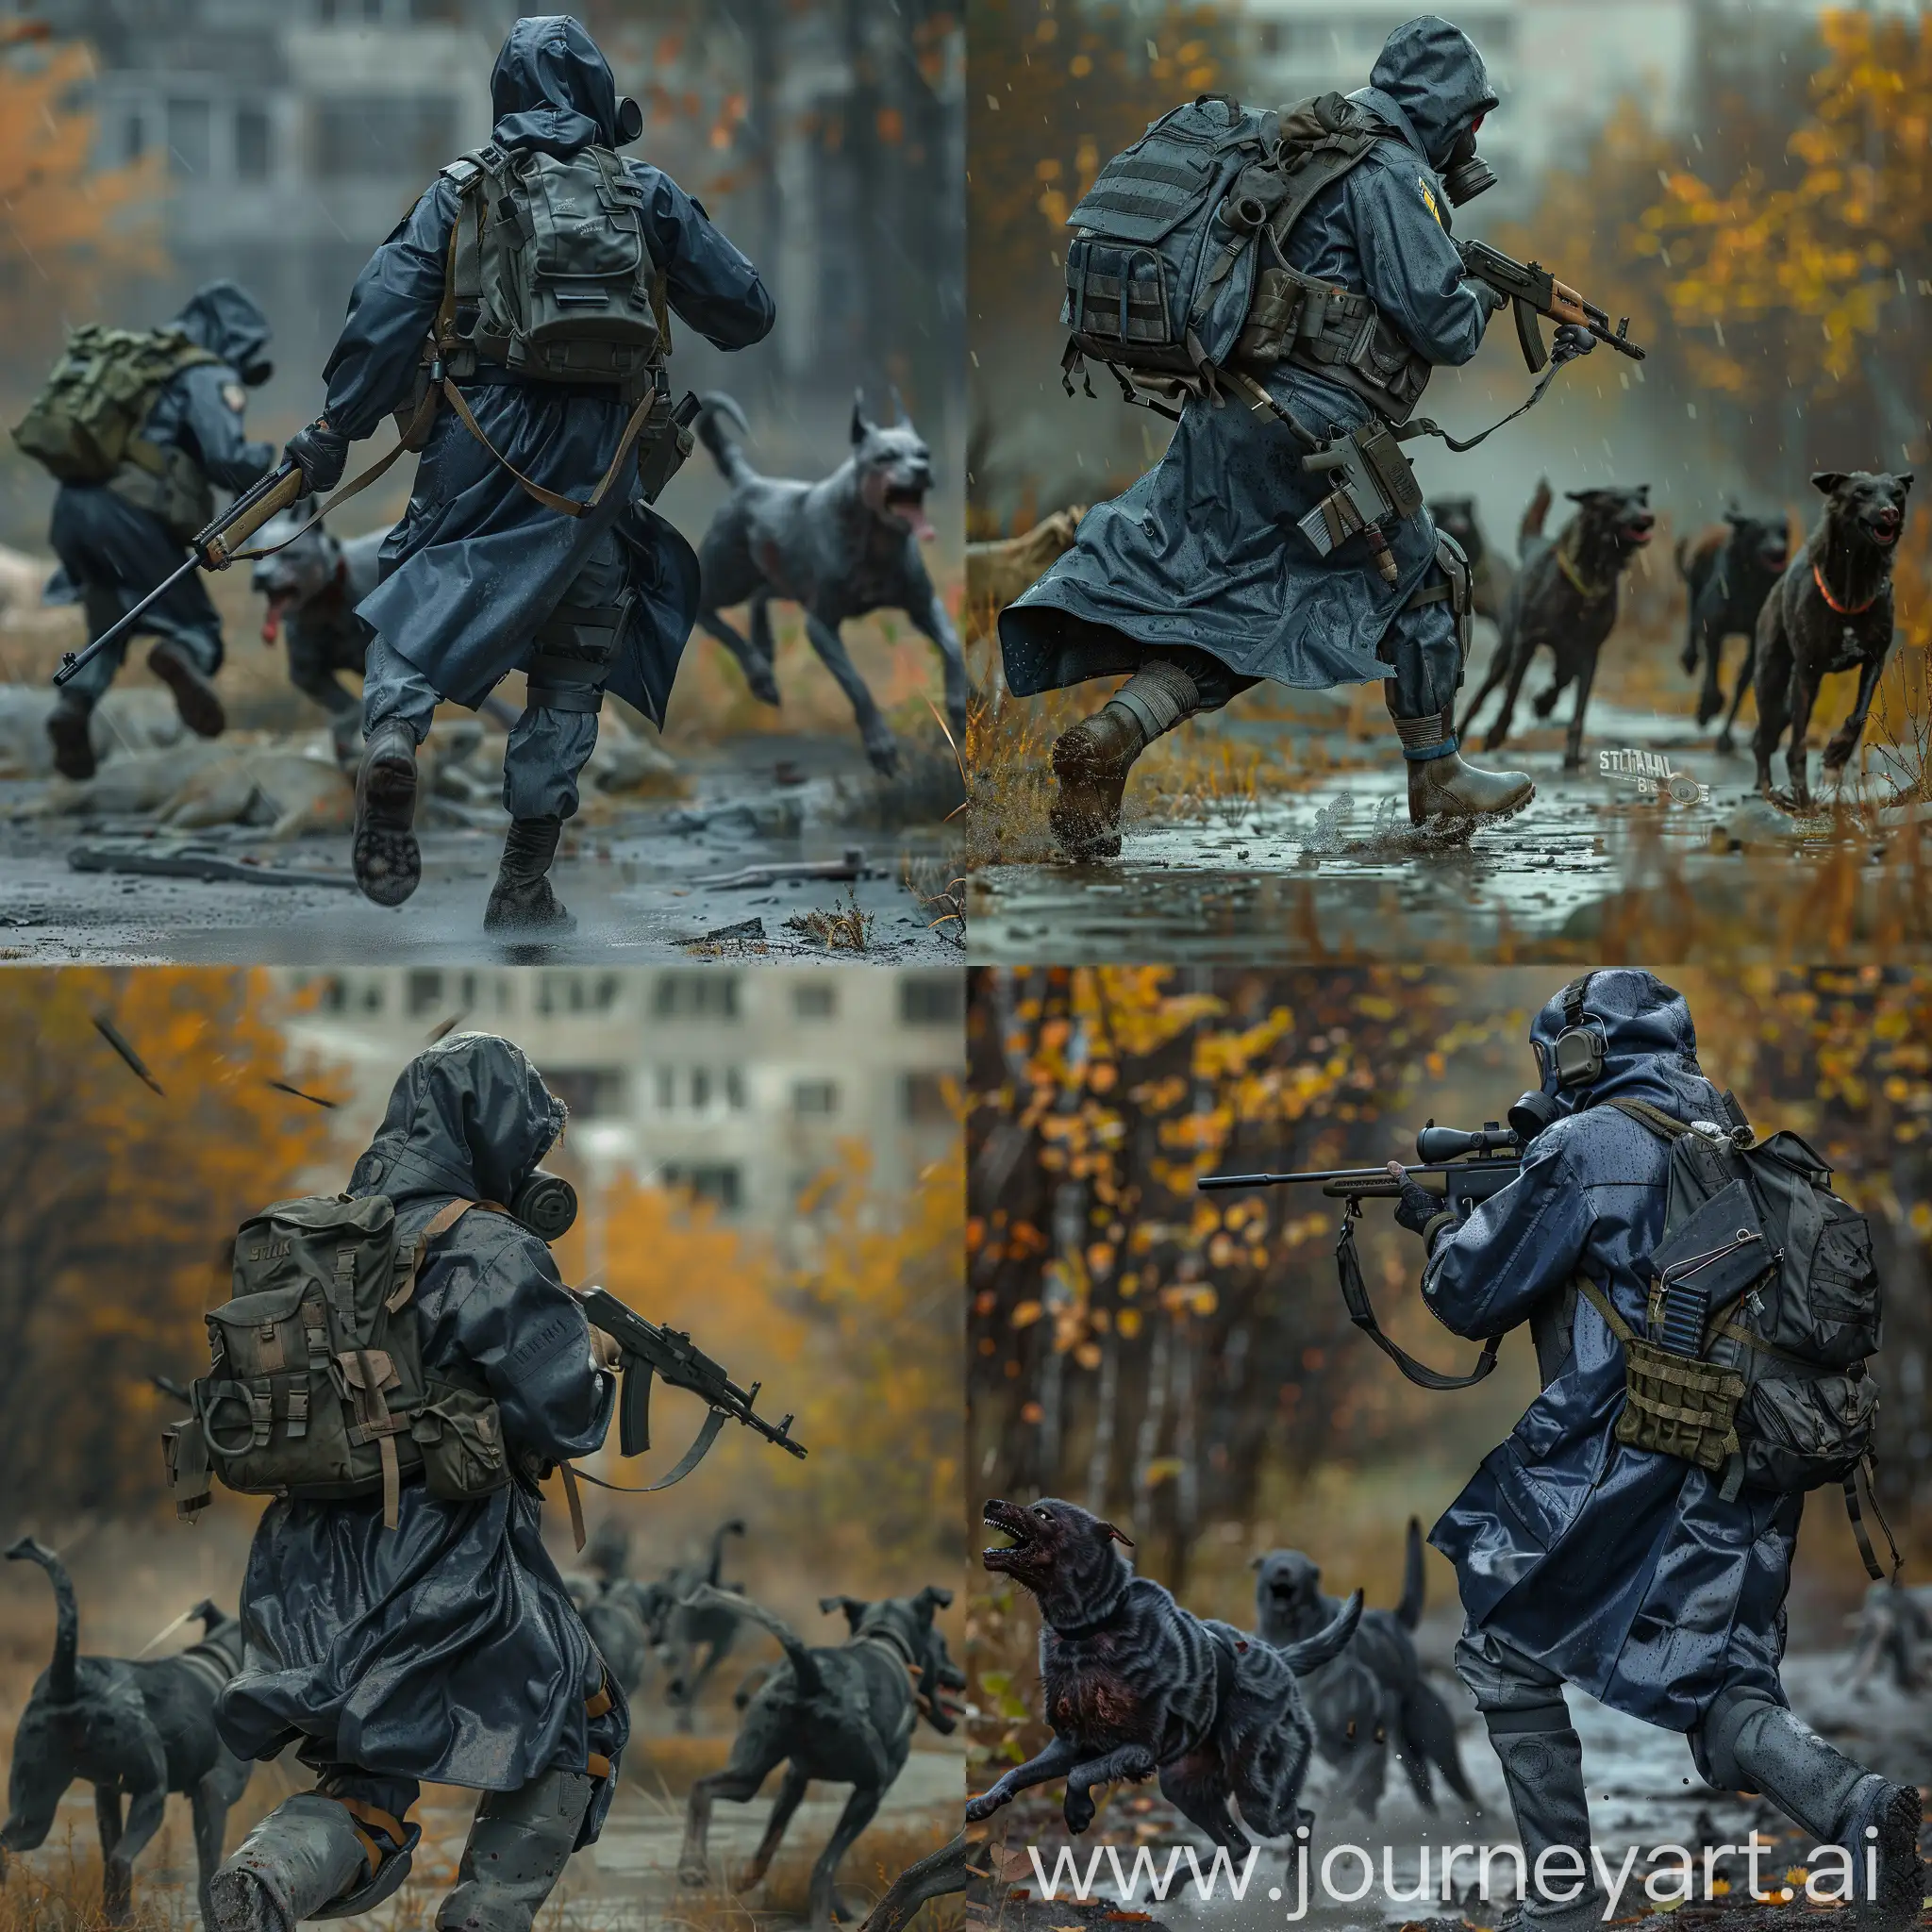 Mercenary-Evading-Infected-Dogs-in-Abandoned-Pripyat-City